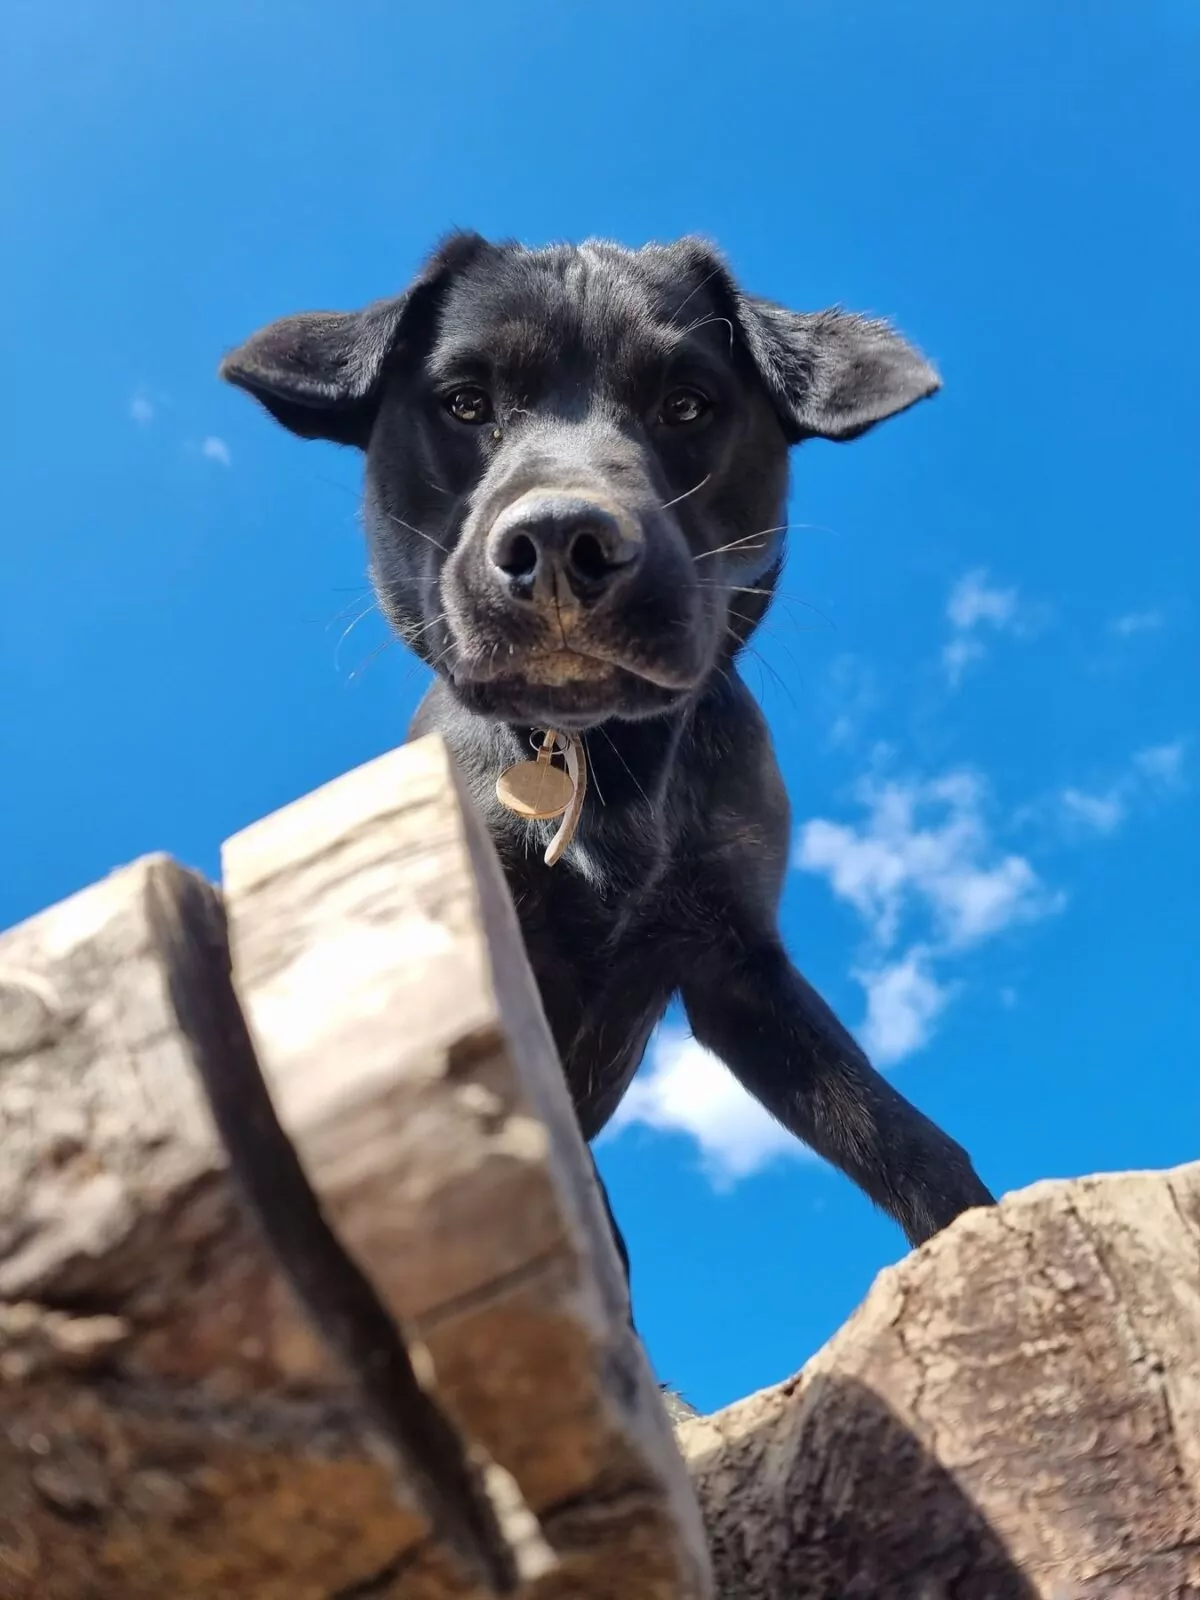 Dog on log at doggy day care